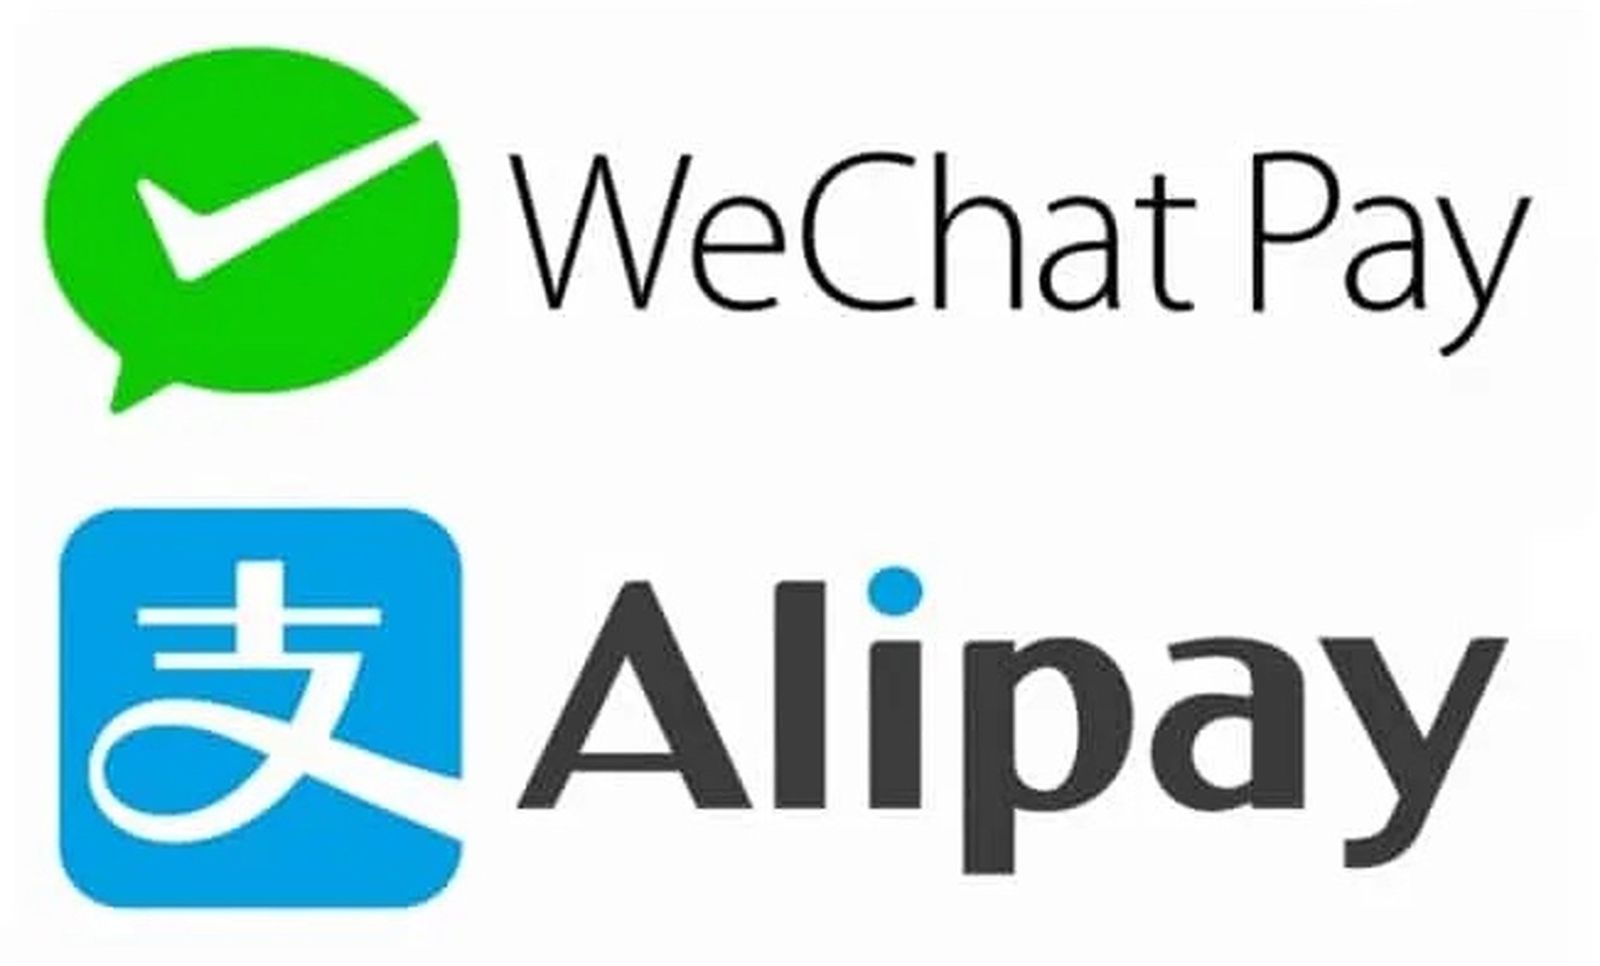 Trump signs executive order to ban US transactions with WeChat Pay and 7 other Chinese applications